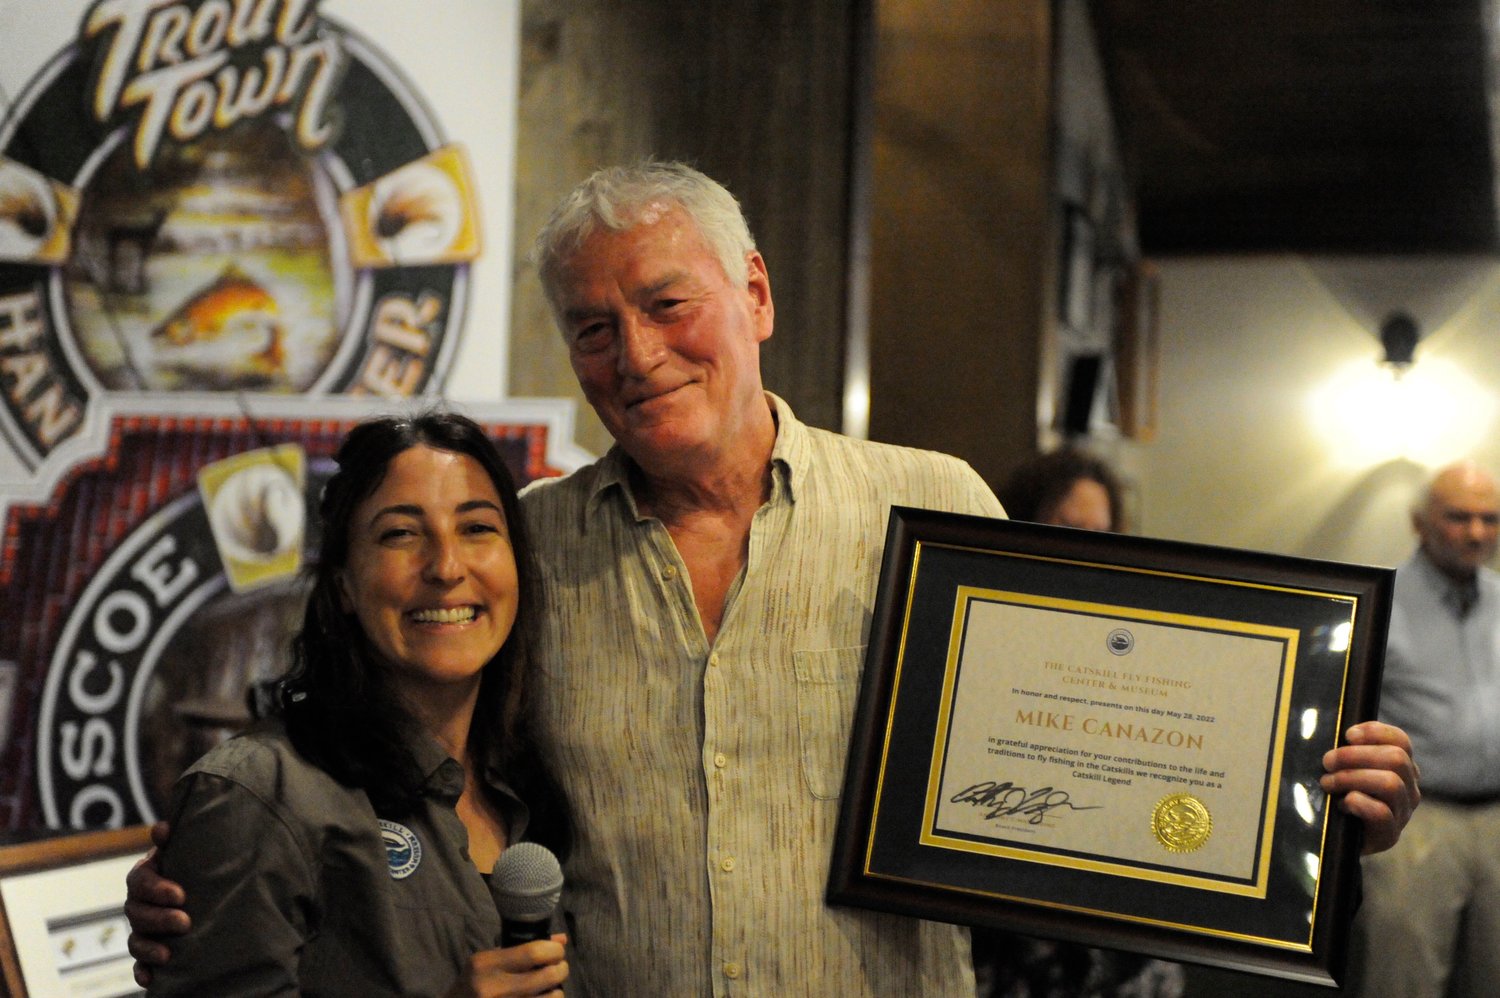 Catskill Legend Mike Canazon grew up finger-fishing, and later became a well-respected fishing guide and master split-cane bamboo rod maker. He is pictured with Jill Borenstein, CFFCM program director...